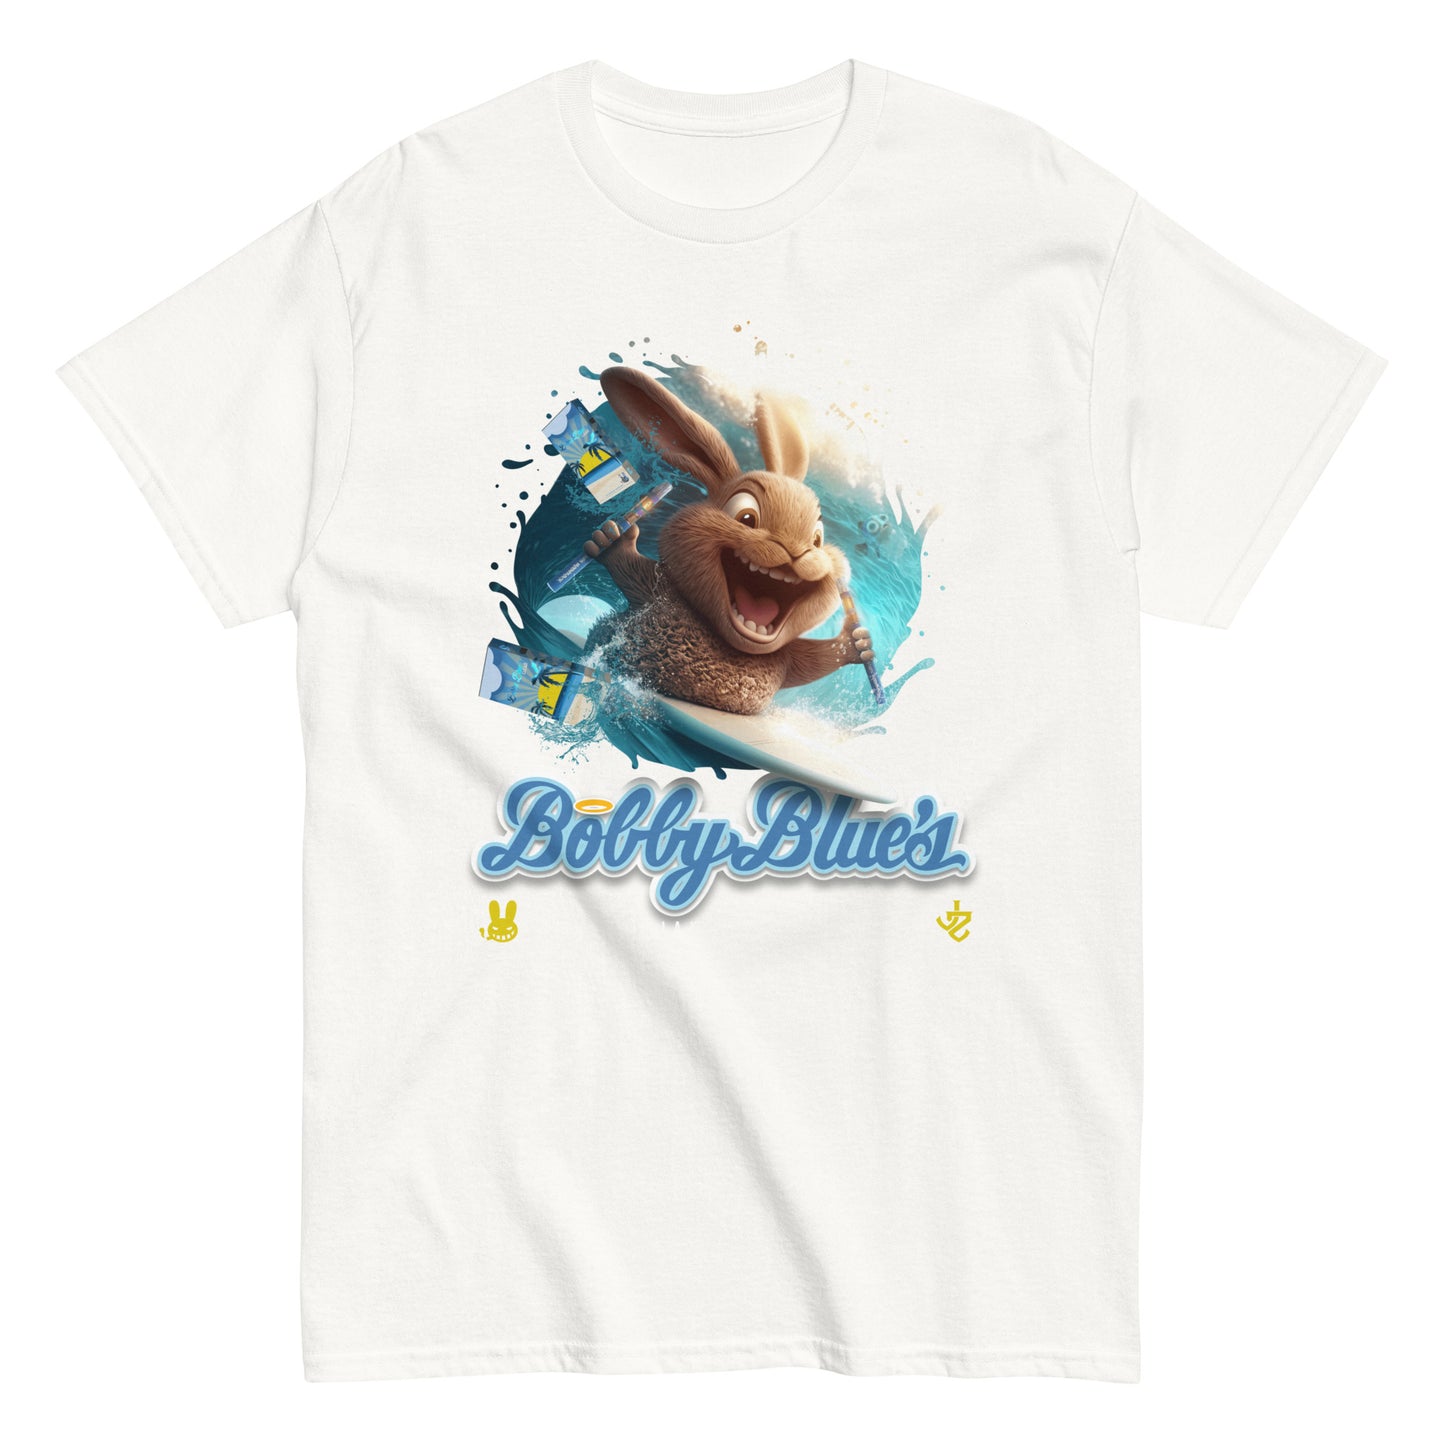 Bobby Blue's Surfing Bunny Tee by Dr. Zodiak's Moonrock